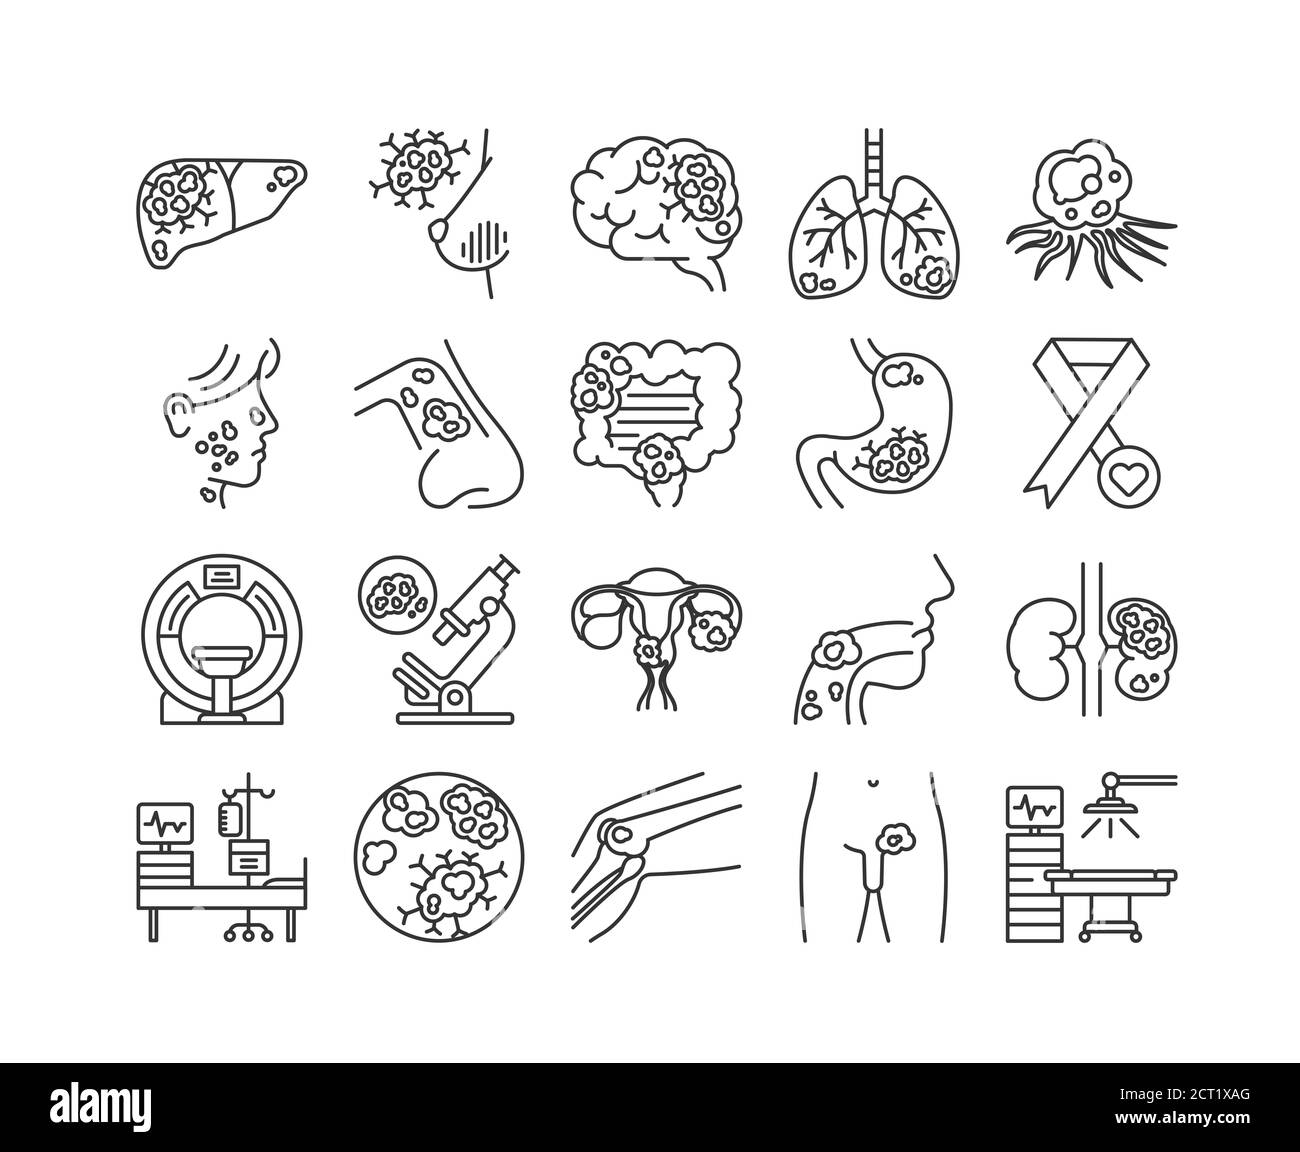 Cancer different organs line black icons set. Oncology medical diagnostic concept. Malignant neoplasms. Stock Photo